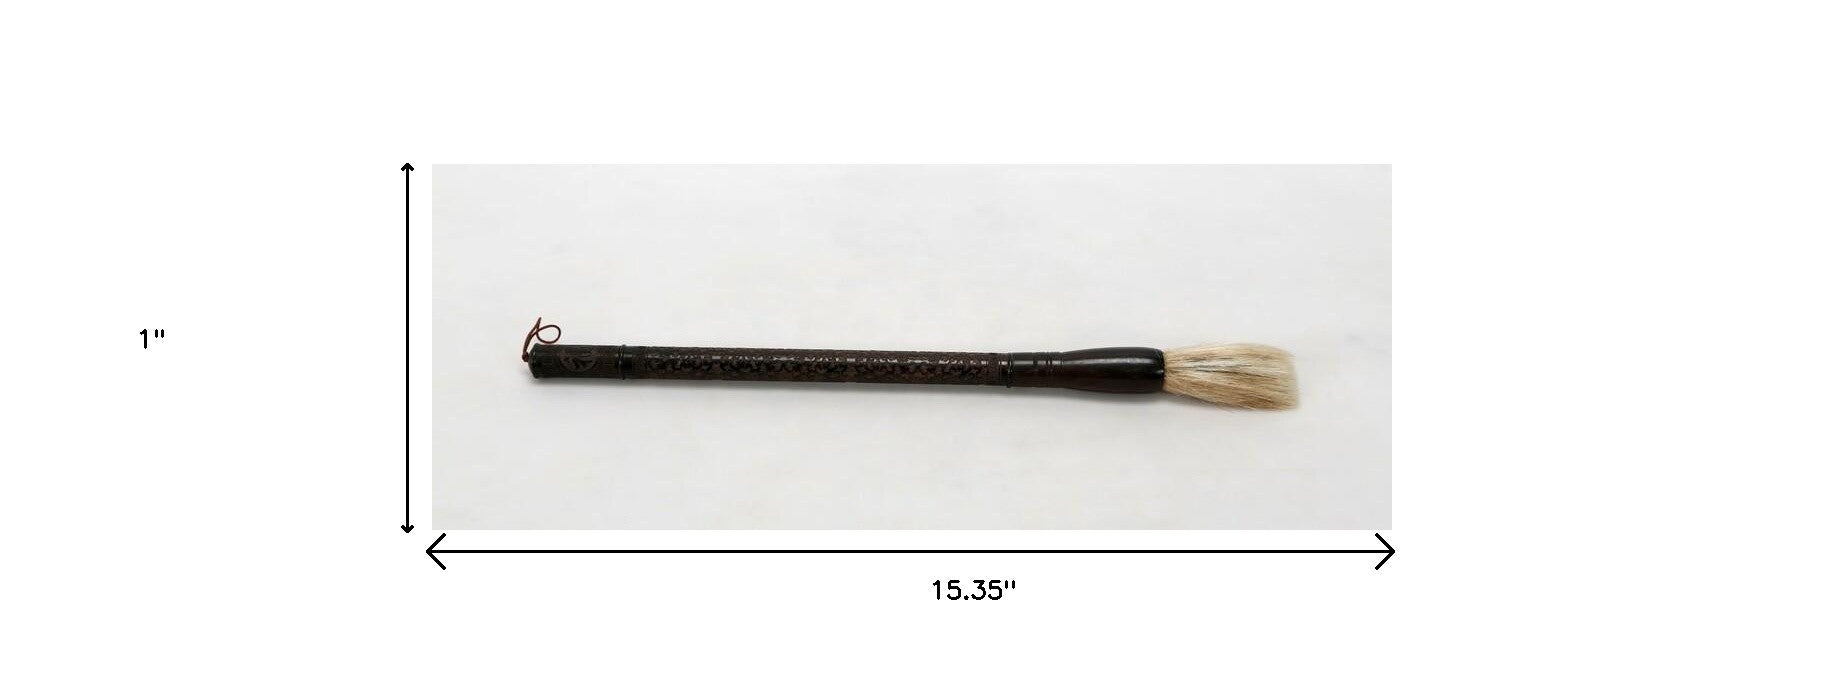 Brown Carved Scroll Wood Decorative Calligraphy Brush